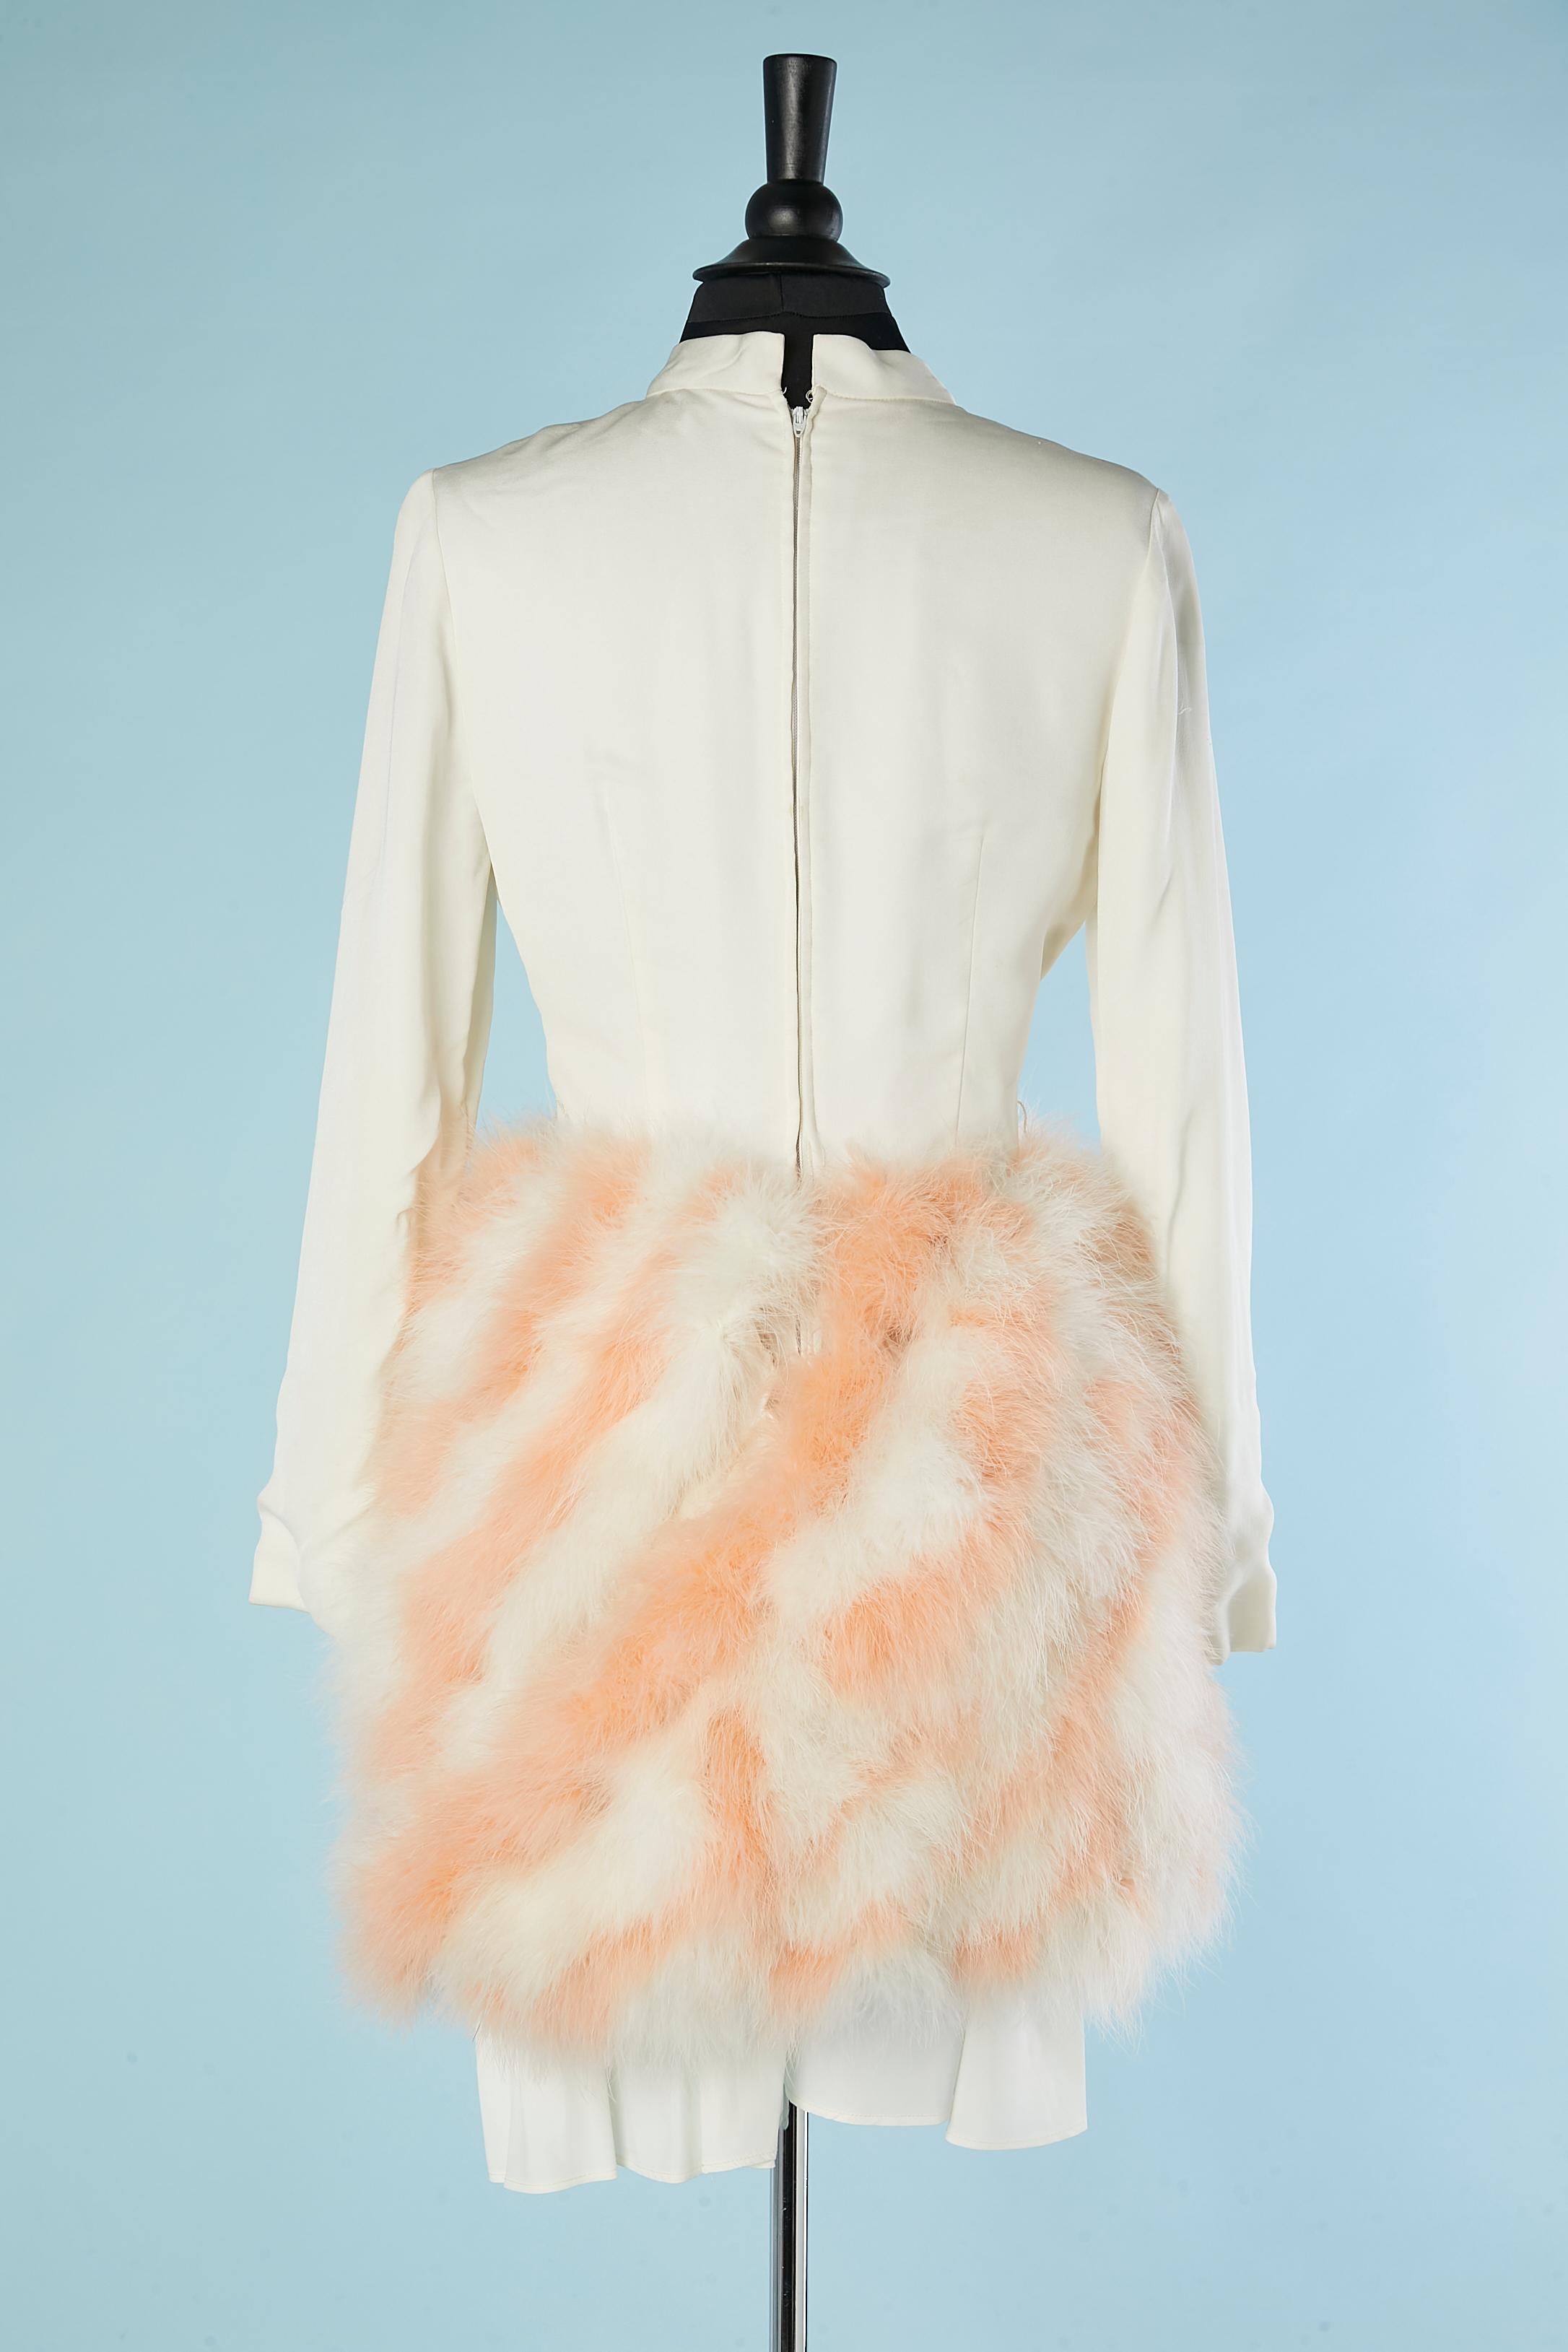 Cocktail dress in off-white rayon and feathers Lord & Taylor 5th Avenue  For Sale 1